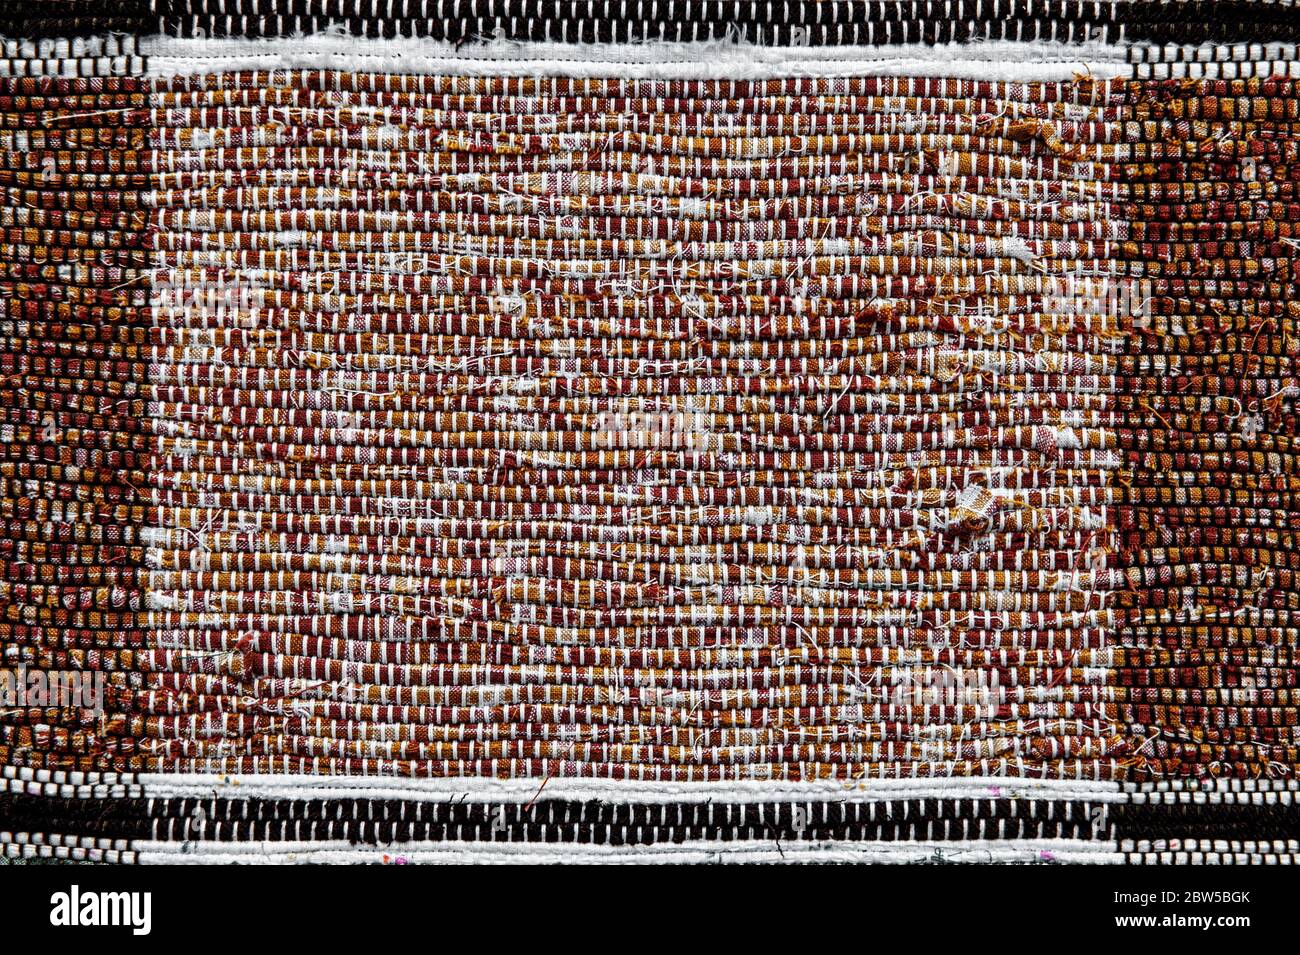 Colorful woven rug made of cotton thread. Handmade fabric fragment of brown color. Stock Photo